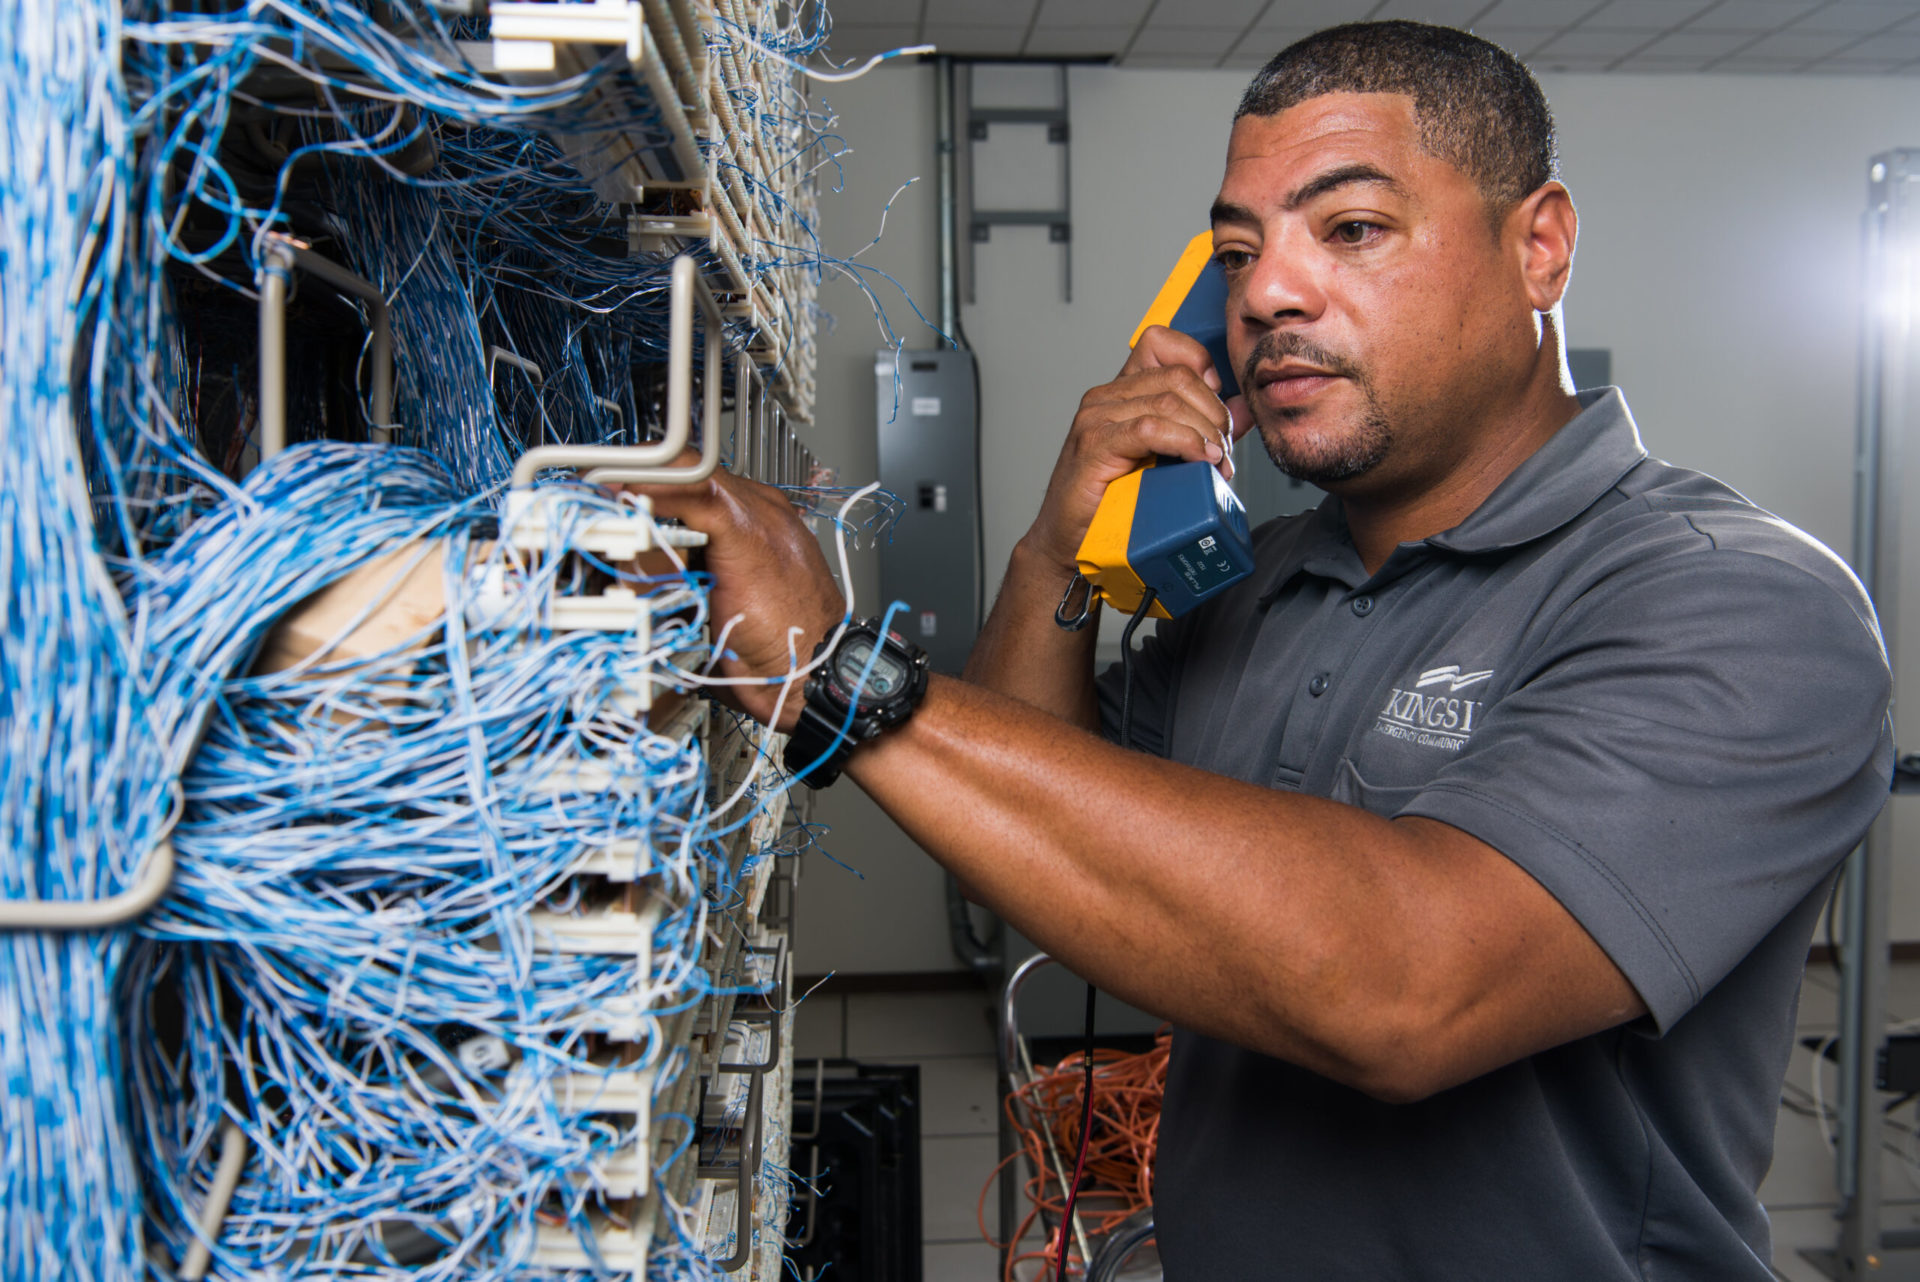 San Diego Buildin Solves Telephony Service Issues While Realizing Substantial Savings